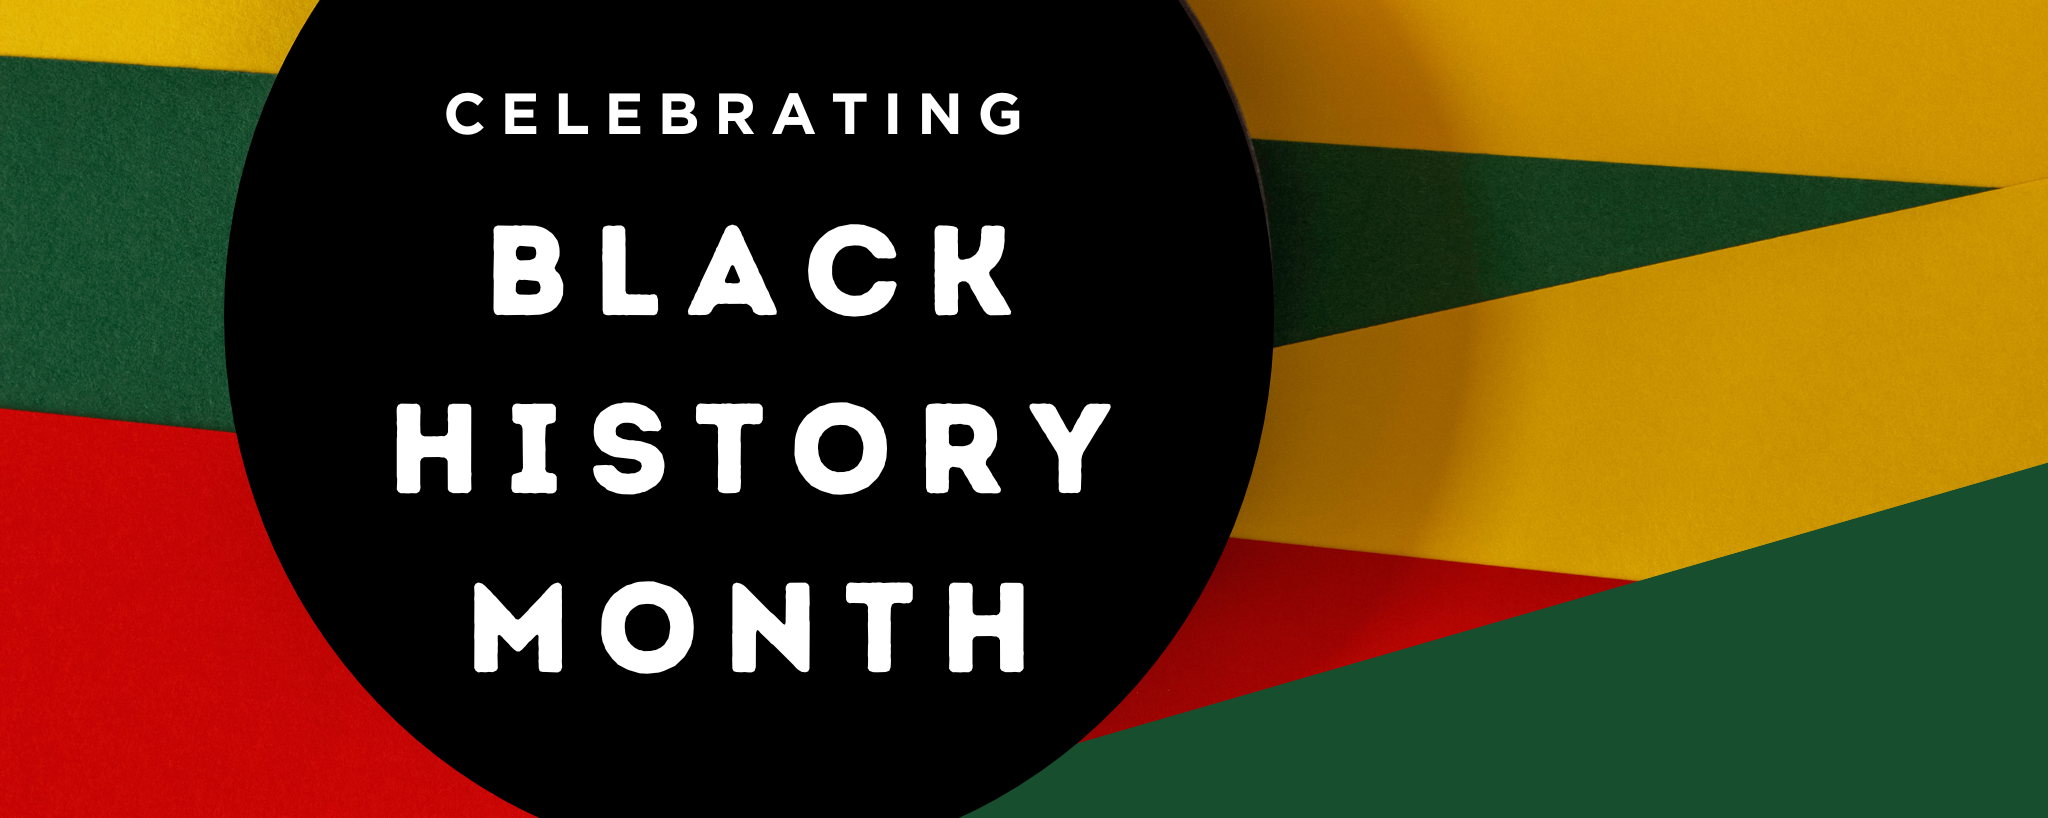 American Councils Black History Month Header 